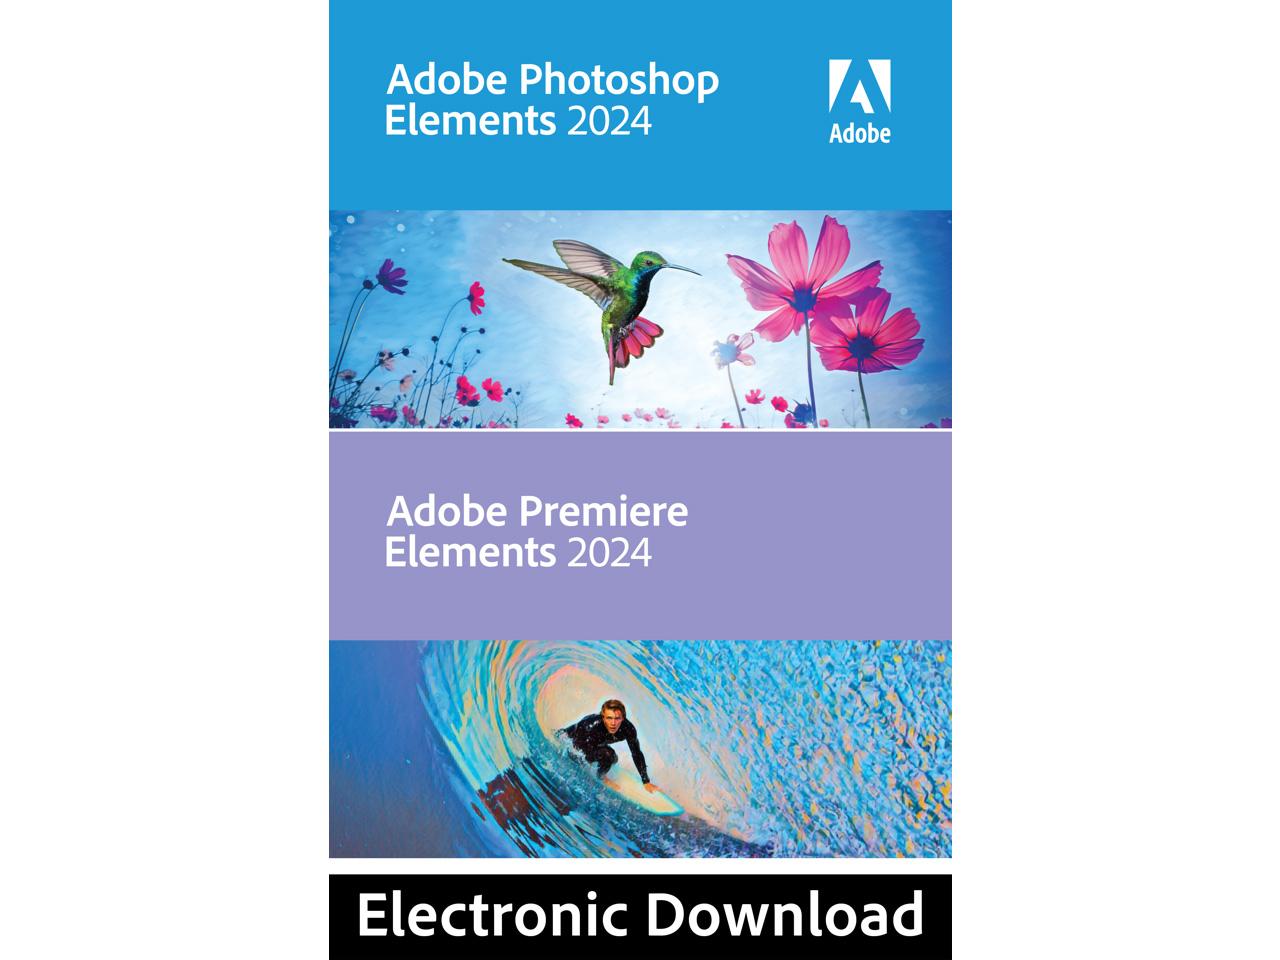 Adobe Photoshop Elements 2024 with Premiere Elements 2024 for $64.99